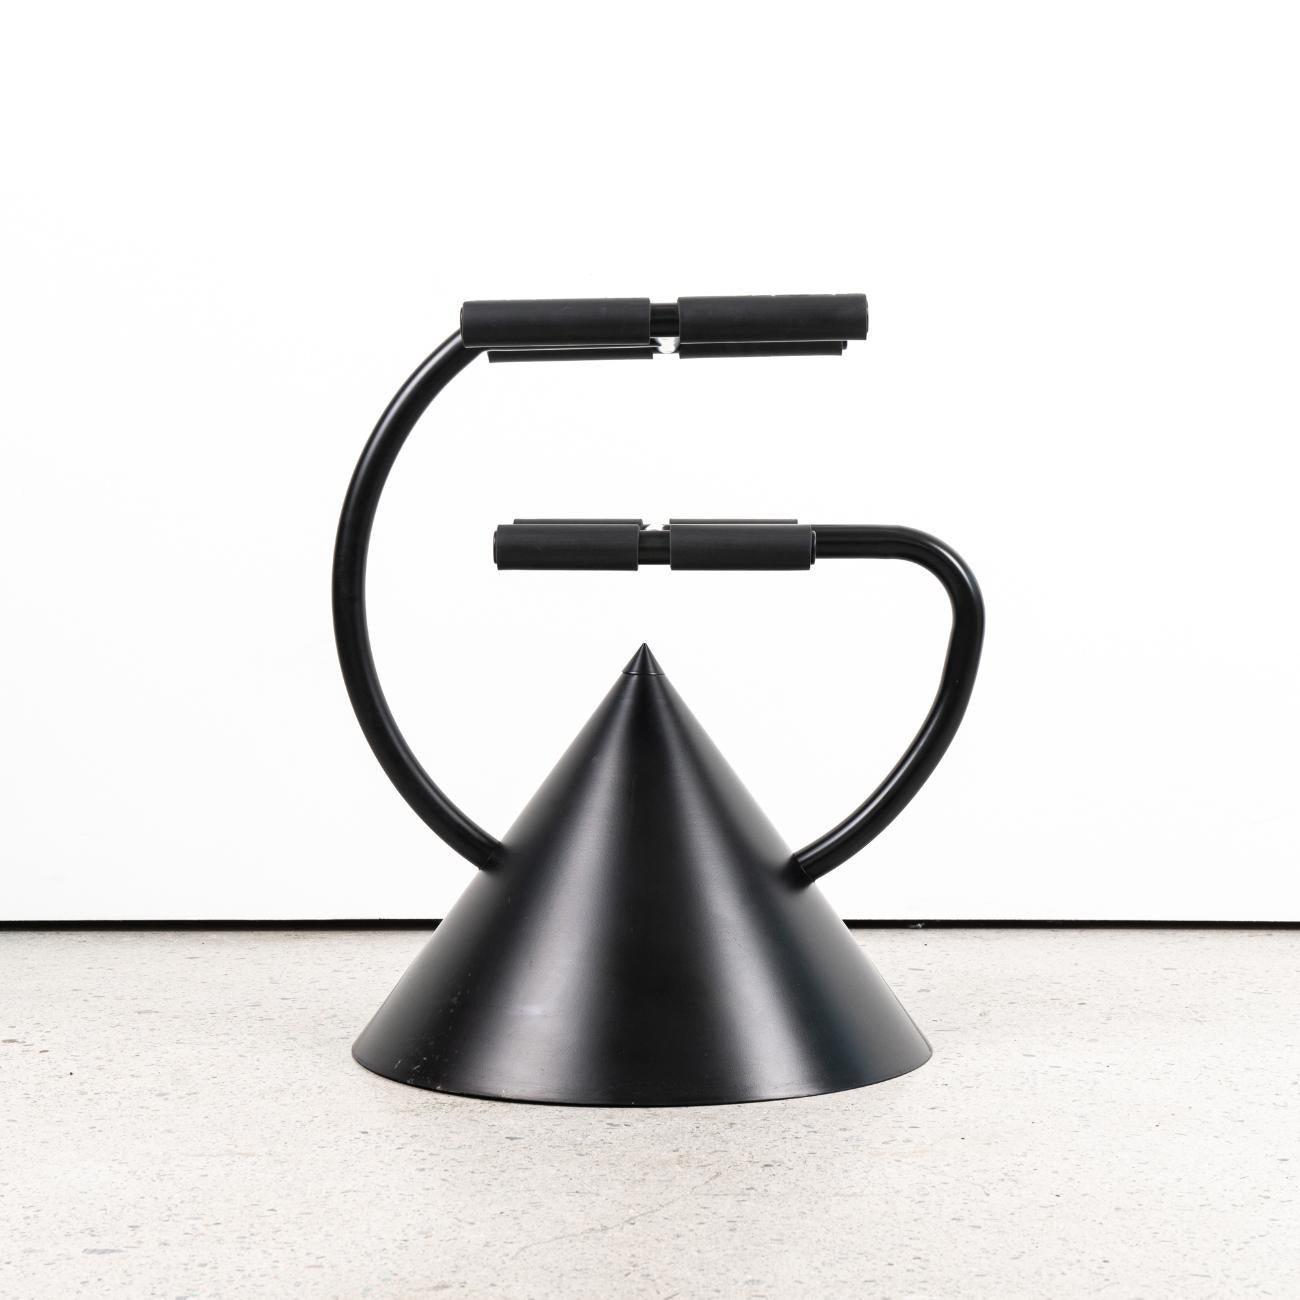 The Hotel Zeus TV stand is a design of Ron Arad. It was manufactured by Zeus Noto in Italy in 1992.
The stand is constructed of enameled steel. 
The prongs of the platform are wrapped in soft foam, while the conical base hides caster wheels for easy